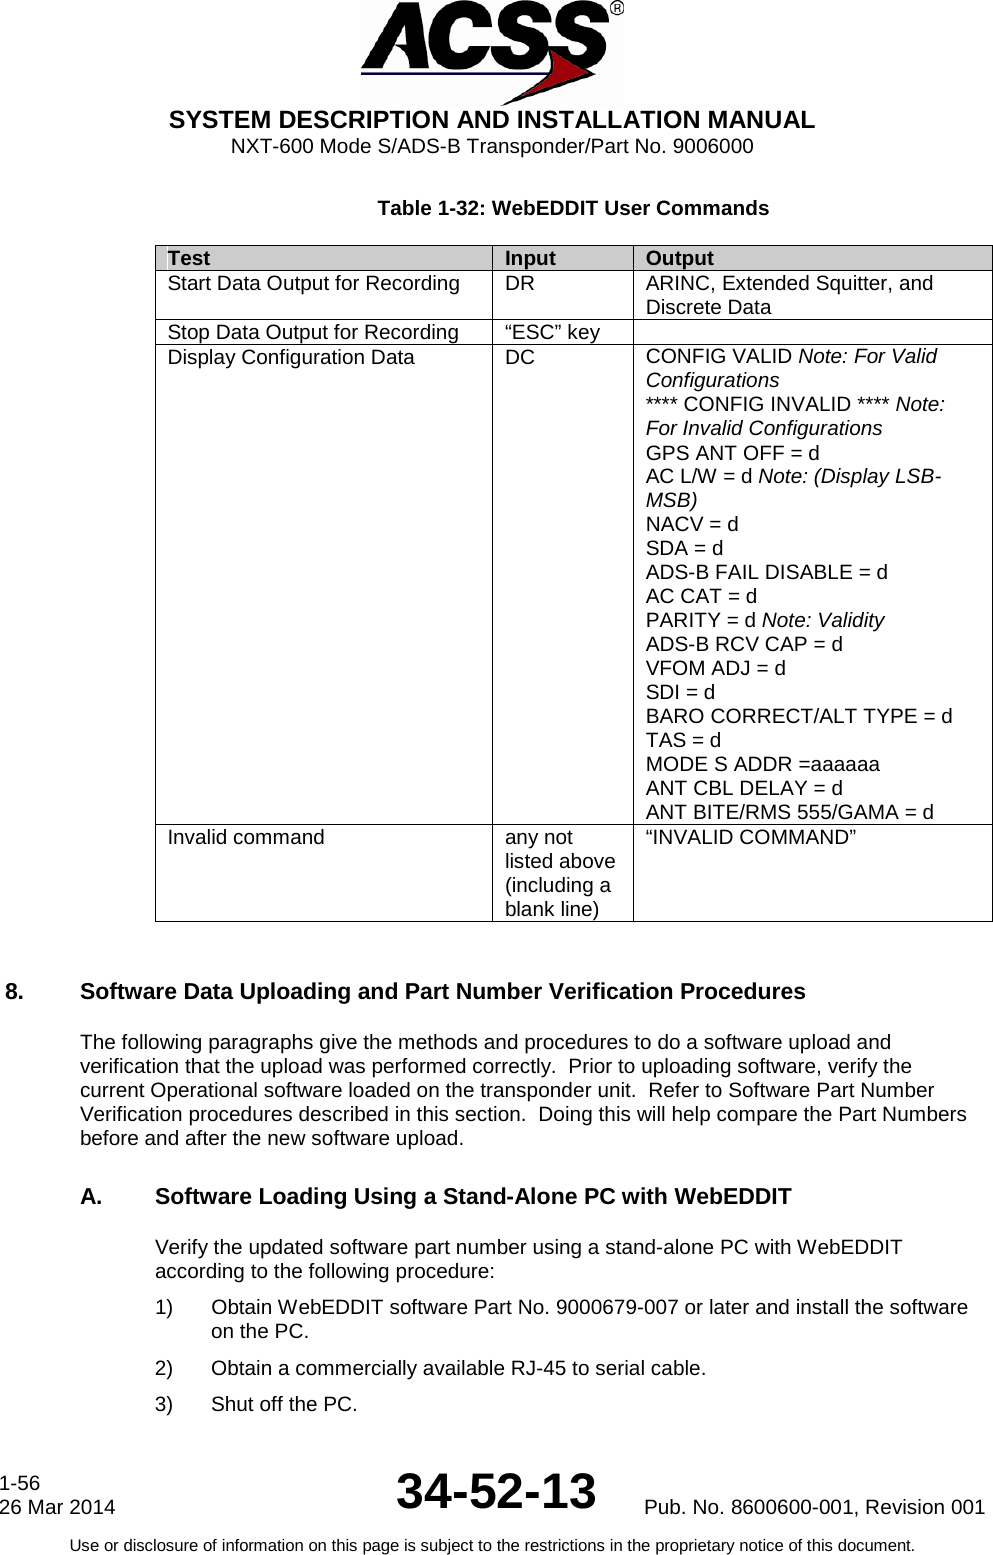  SYSTEM DESCRIPTION AND INSTALLATION MANUAL NXT-600 Mode S/ADS-B Transponder/Part No. 9006000 Table 1-32: WebEDDIT User Commands Test Input Output Start Data Output for Recording DR ARINC, Extended Squitter, and Discrete Data Stop Data Output for Recording “ESC” key  Display Configuration Data DC CONFIG VALID Note: For Valid Configurations **** CONFIG INVALID **** Note: For Invalid Configurations GPS ANT OFF = d AC L/W = d Note: (Display LSB-MSB) NACV = d SDA = d ADS-B FAIL DISABLE = d AC CAT = d PARITY = d Note: Validity ADS-B RCV CAP = d VFOM ADJ = d SDI = d BARO CORRECT/ALT TYPE = d TAS = d MODE S ADDR =aaaaaa ANT CBL DELAY = d  ANT BITE/RMS 555/GAMA = d Invalid command any not listed above (including a blank line) “INVALID COMMAND”  8. Software Data Uploading and Part Number Verification Procedures The following paragraphs give the methods and procedures to do a software upload and verification that the upload was performed correctly.  Prior to uploading software, verify the current Operational software loaded on the transponder unit.  Refer to Software Part Number Verification procedures described in this section.  Doing this will help compare the Part Numbers before and after the new software upload. A. Software Loading Using a Stand-Alone PC with WebEDDIT Verify the updated software part number using a stand-alone PC with WebEDDIT according to the following procedure: 1) Obtain WebEDDIT software Part No. 9000679-007 or later and install the software on the PC. 2) Obtain a commercially available RJ-45 to serial cable. 3) Shut off the PC. 1-56 26 Mar 2014 34-52-13 Pub. No. 8600600-001, Revision 001 Use or disclosure of information on this page is subject to the restrictions in the proprietary notice of this document.  